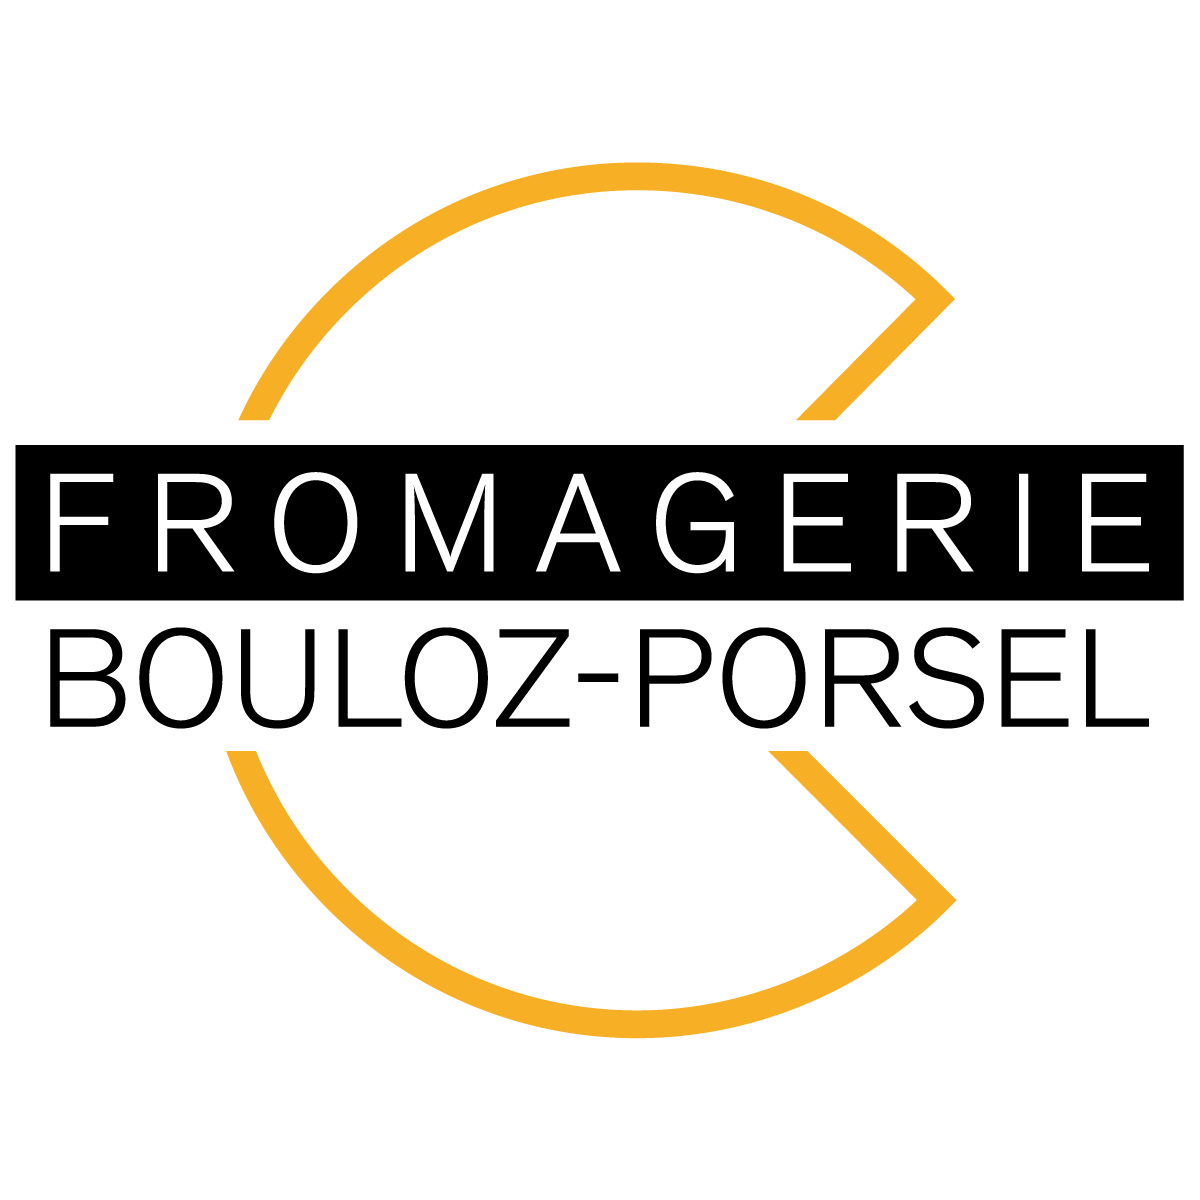 Laiterie-Fromagerie Bouloz-Porsel